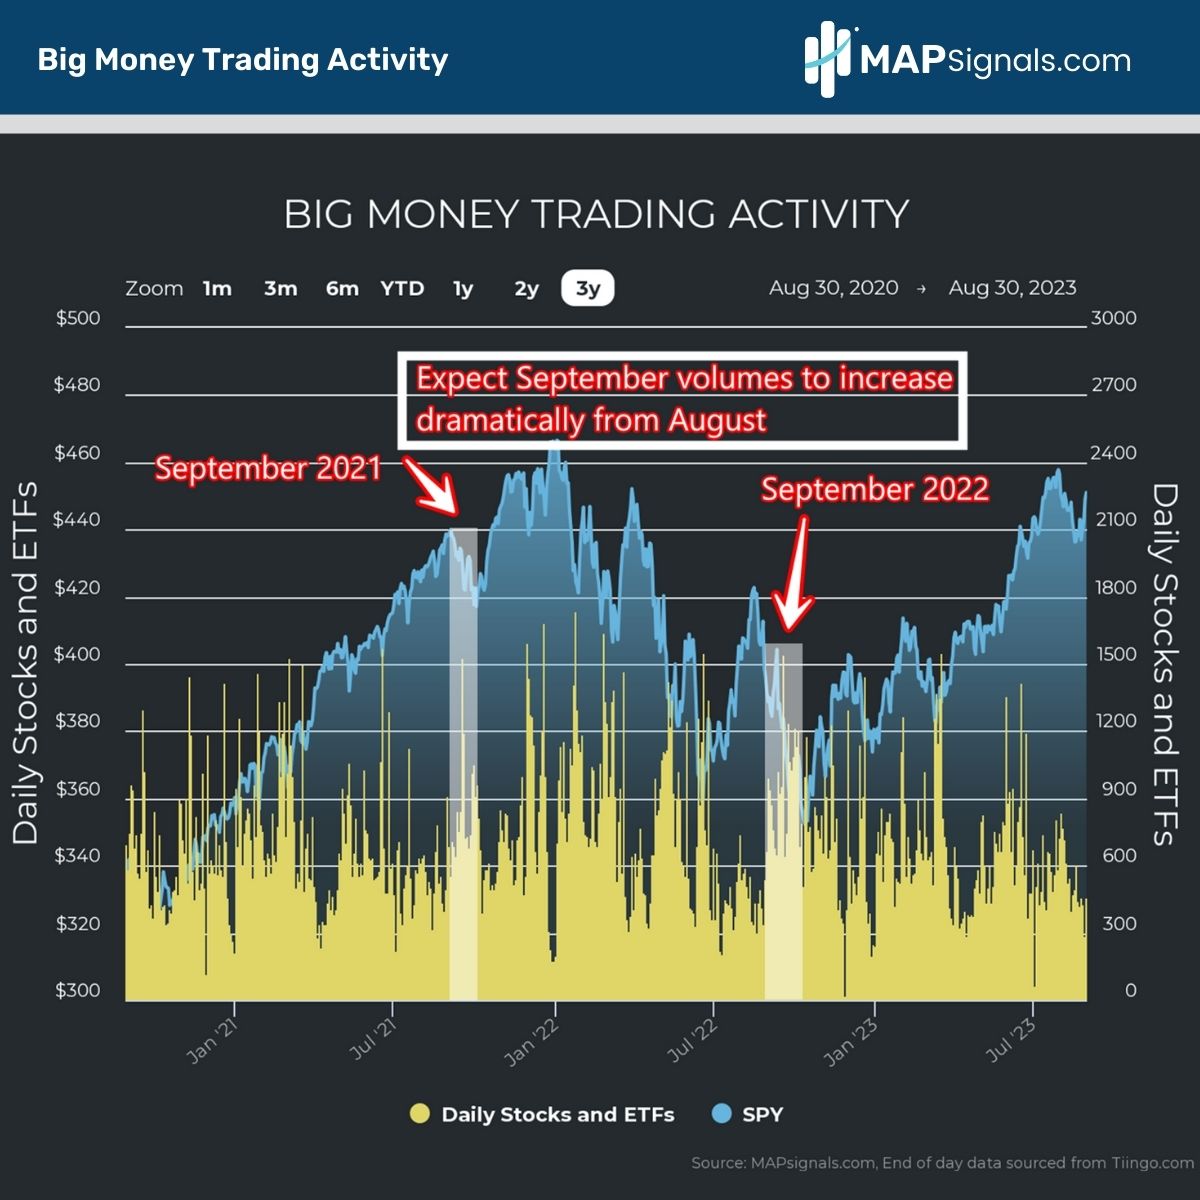 Expected increased September Volumes | Big Money Trading Activity | MAPsignals